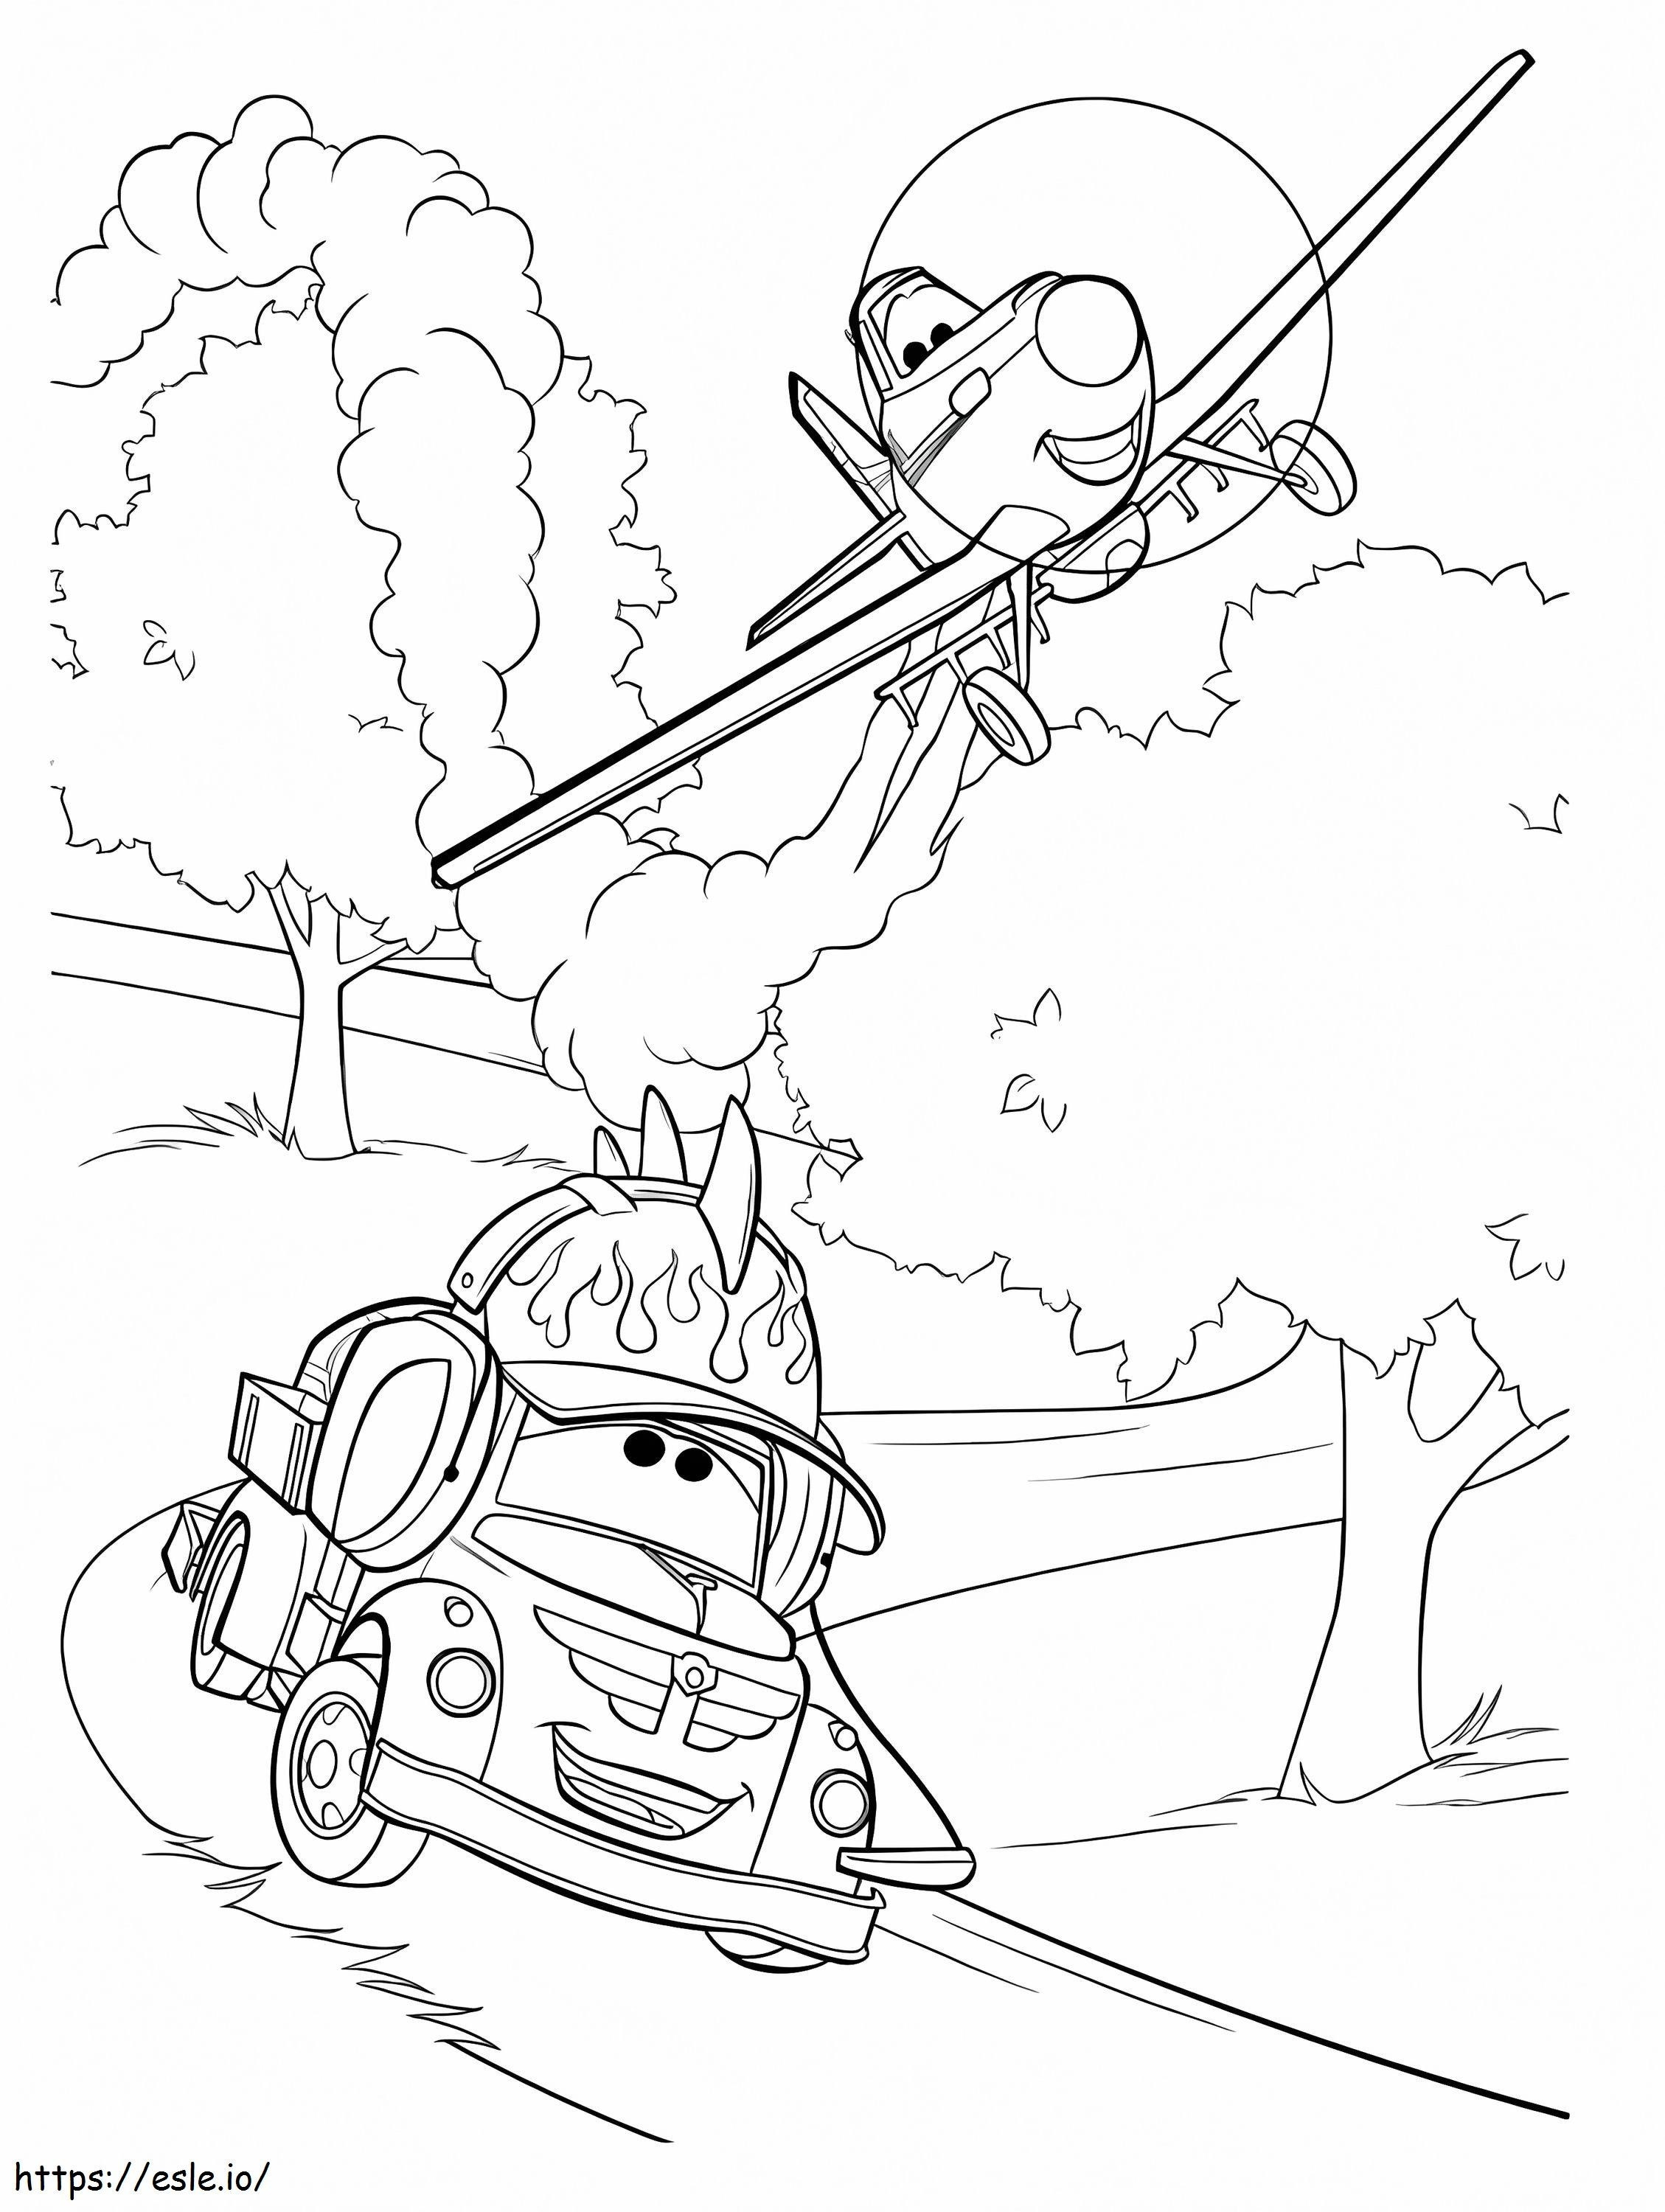 Disney Cars And Planes coloring page